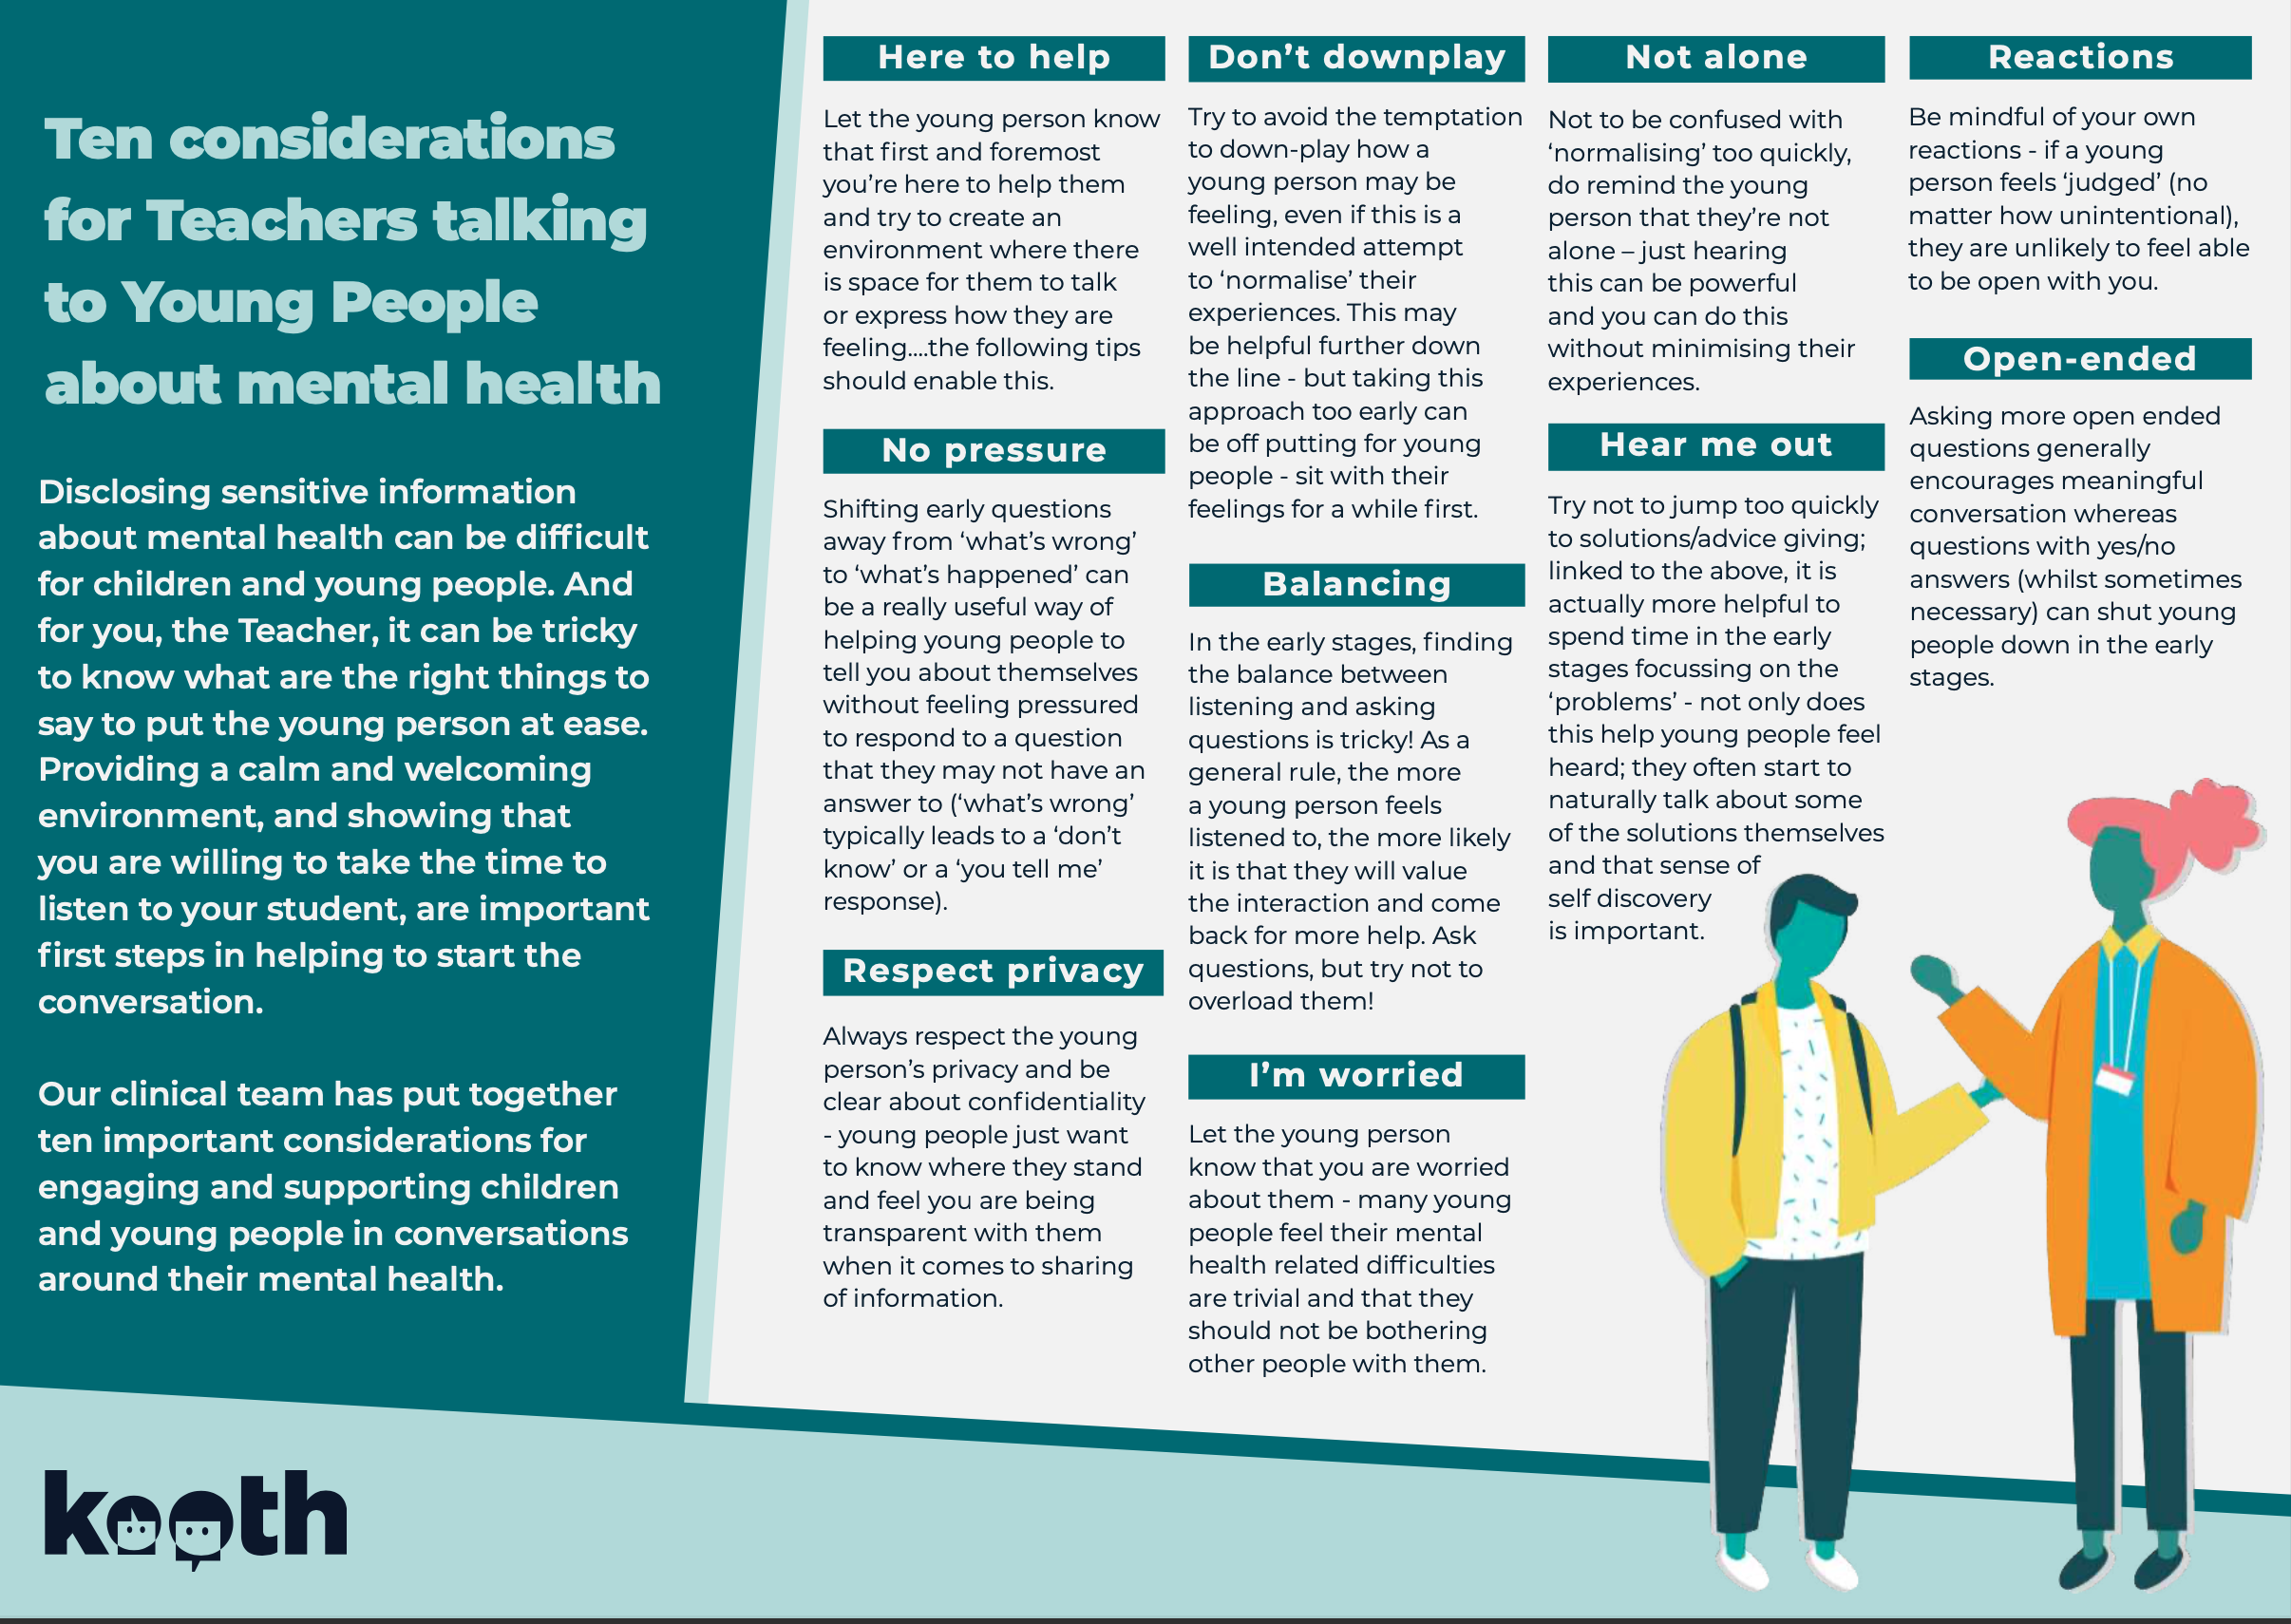 Ten considerations for talking to YP about mengtal health